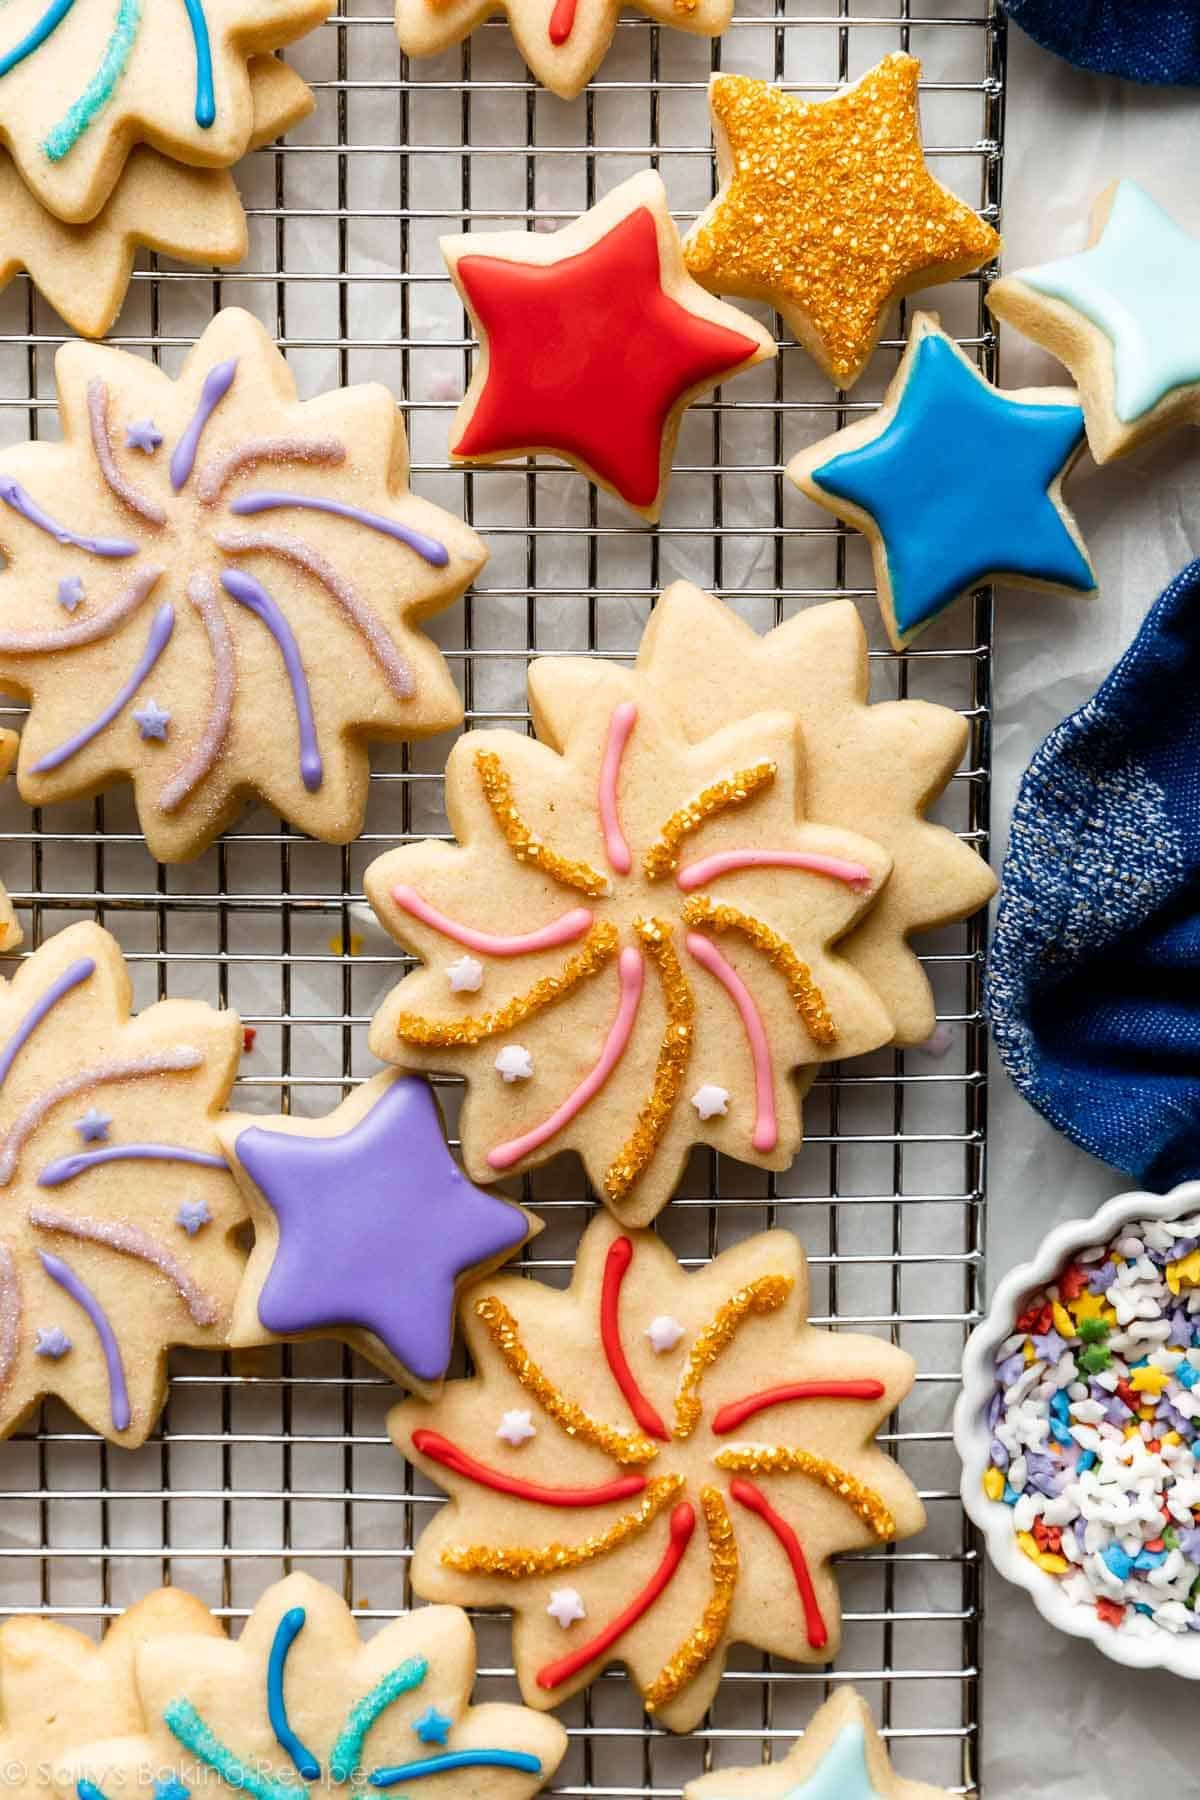 decorated fireworks celebration and star-shaped sugar cookies with various colors of icing and gold sprinkles.